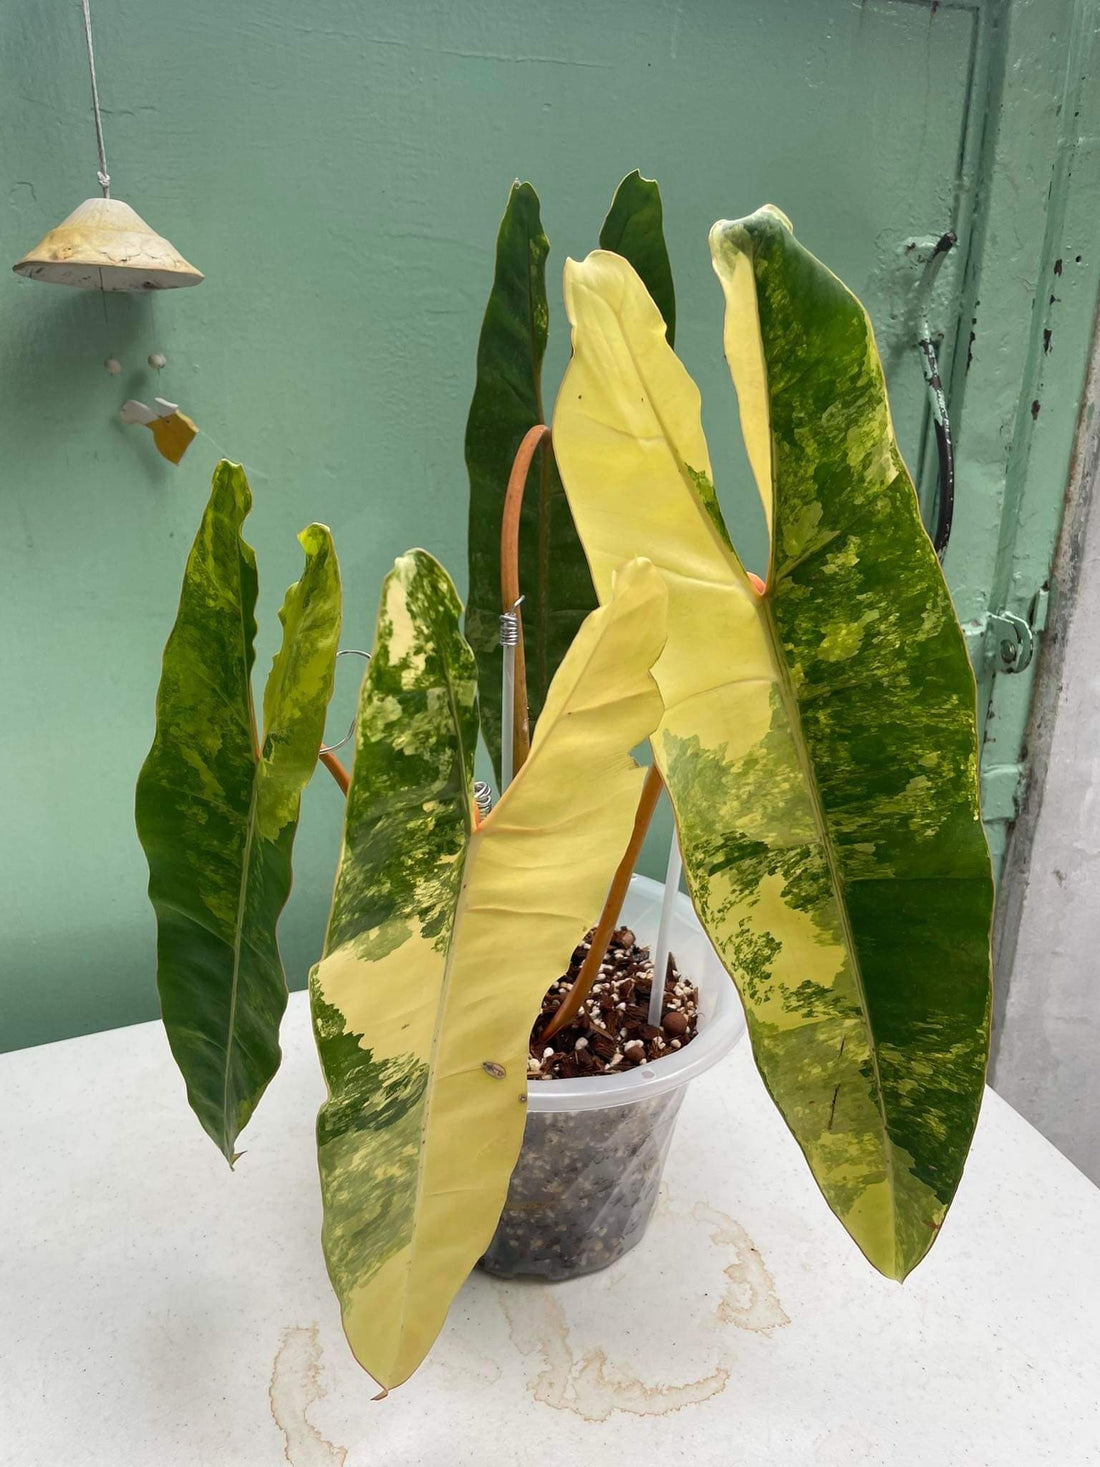 How can I make my Philodendron billietiae variageted more variegated?